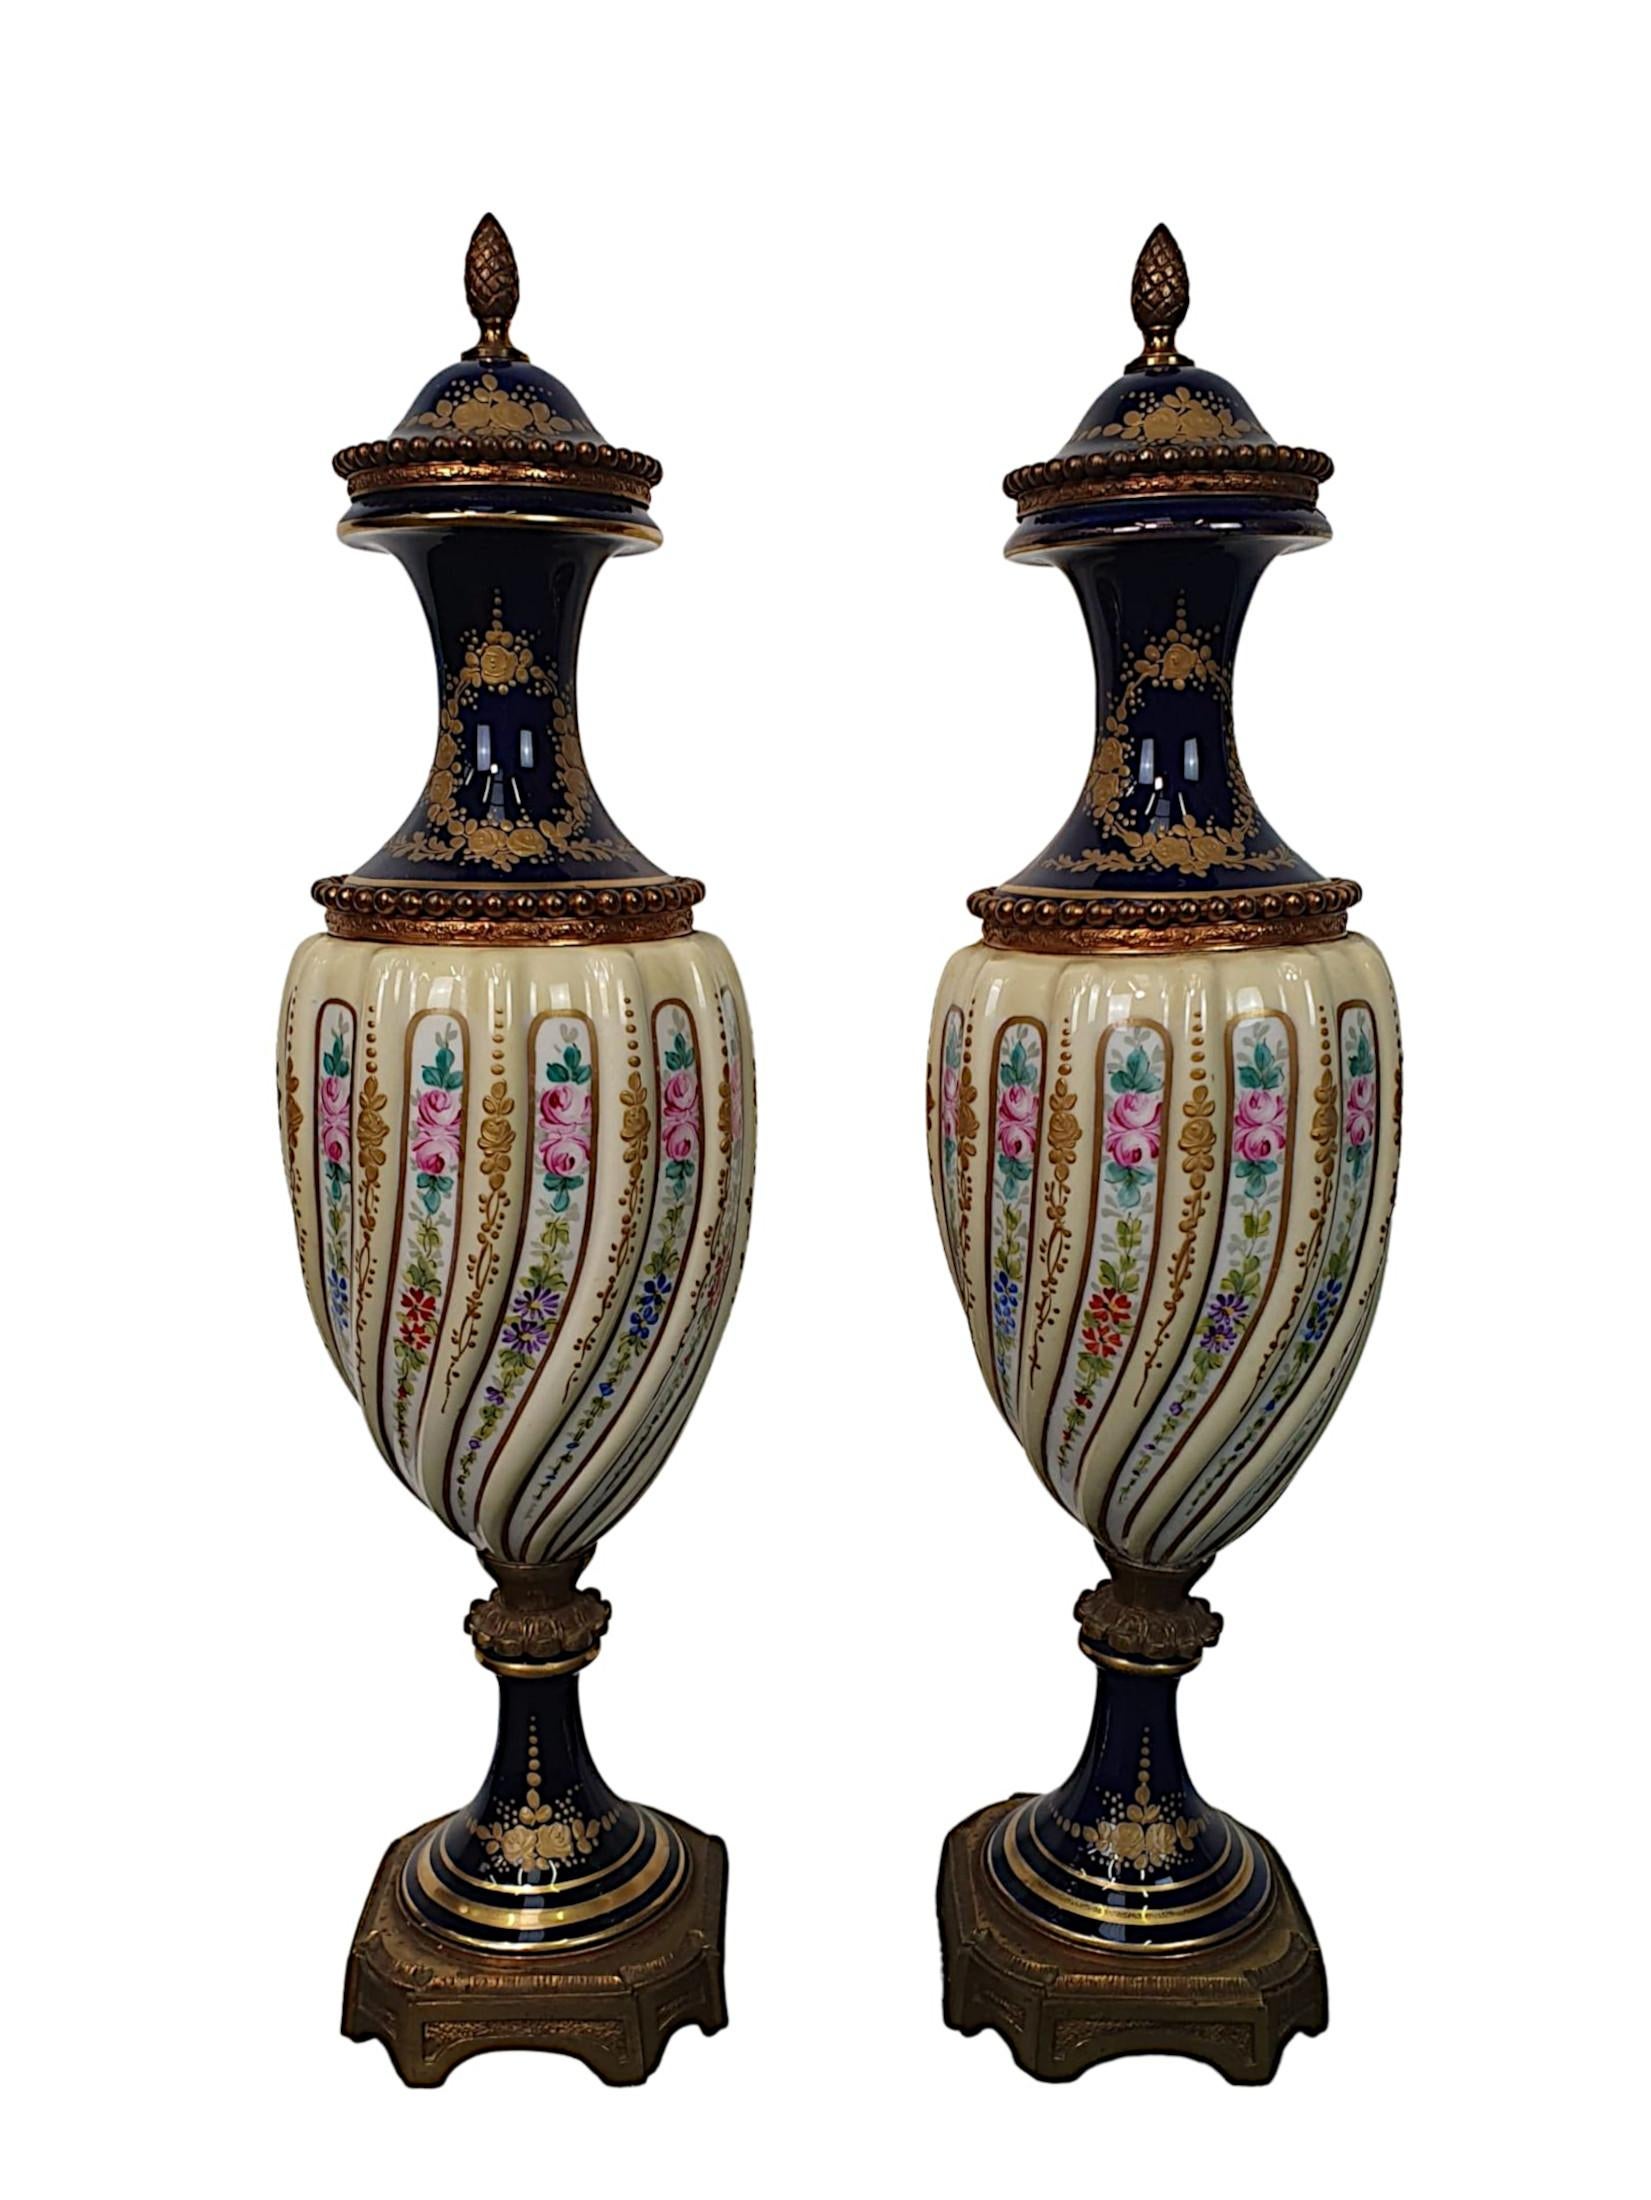 A lovely quality pair of 19th century porcelain and ormolu mounted lidded urns in the manner of Sèvres. The lids with acorn finial raised over a classic baluster vase body with beaded motif detail. Intricately hand painted throughout with decorate